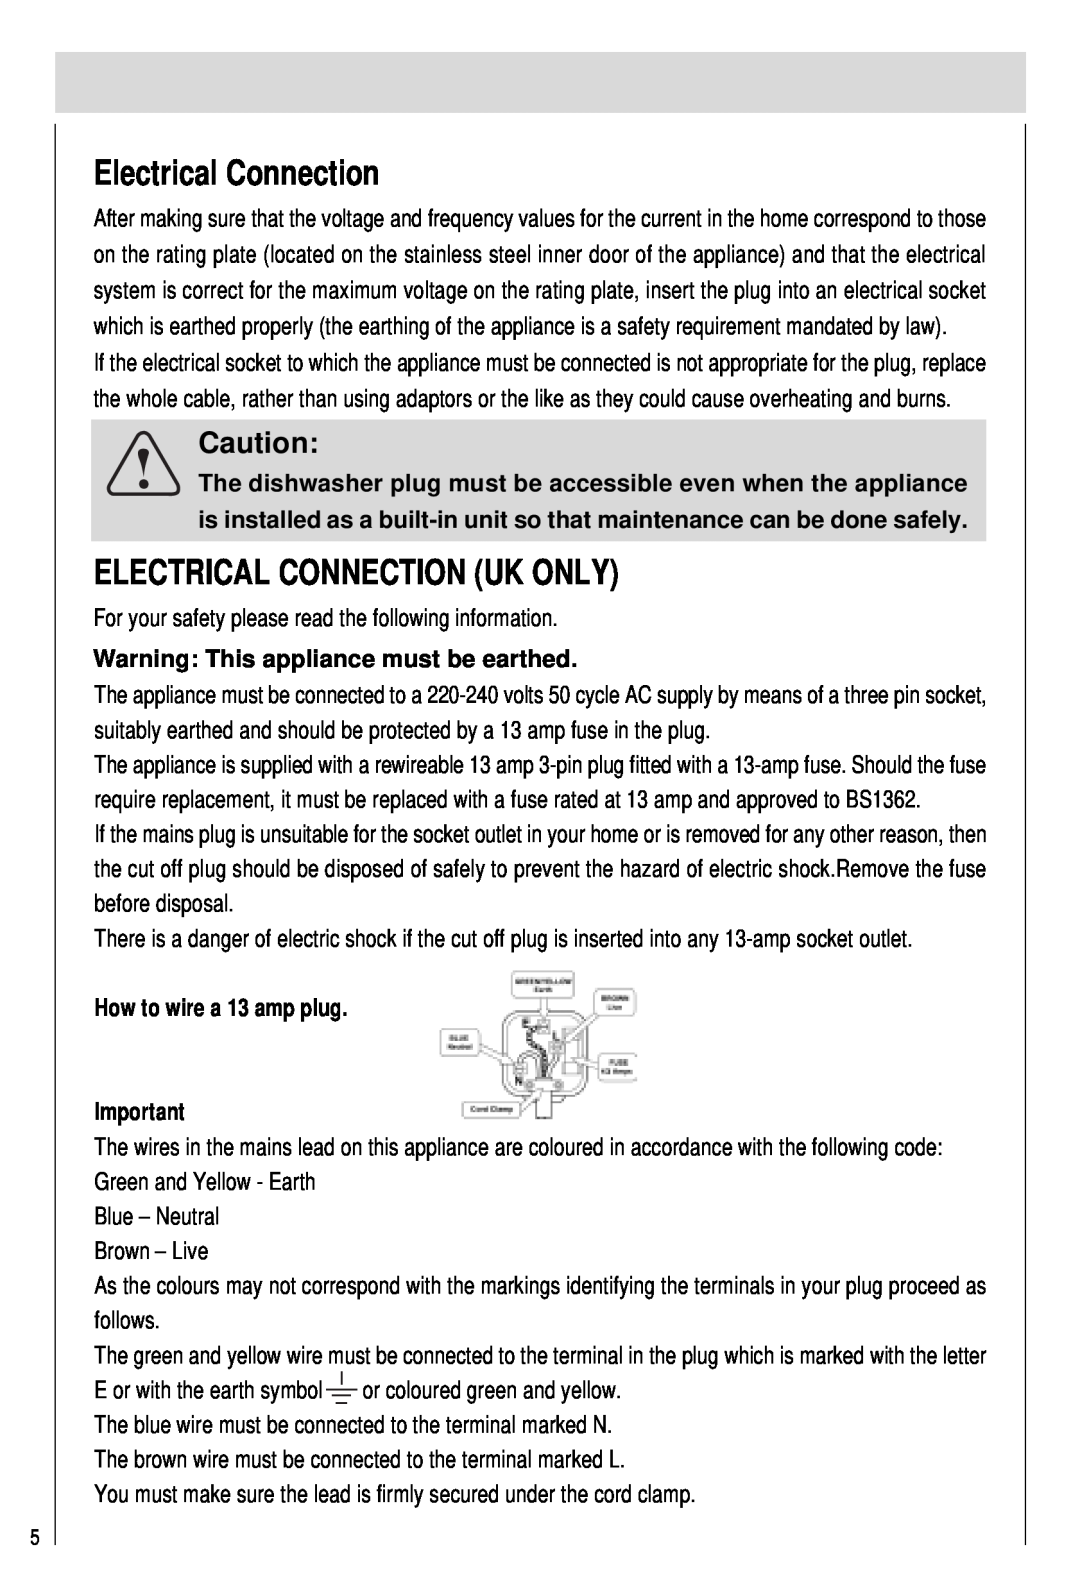 Haier DW12-PFE2-U manual Electrical Connection Uk Only, The dishwasher plug must be accessible even when the appliance 